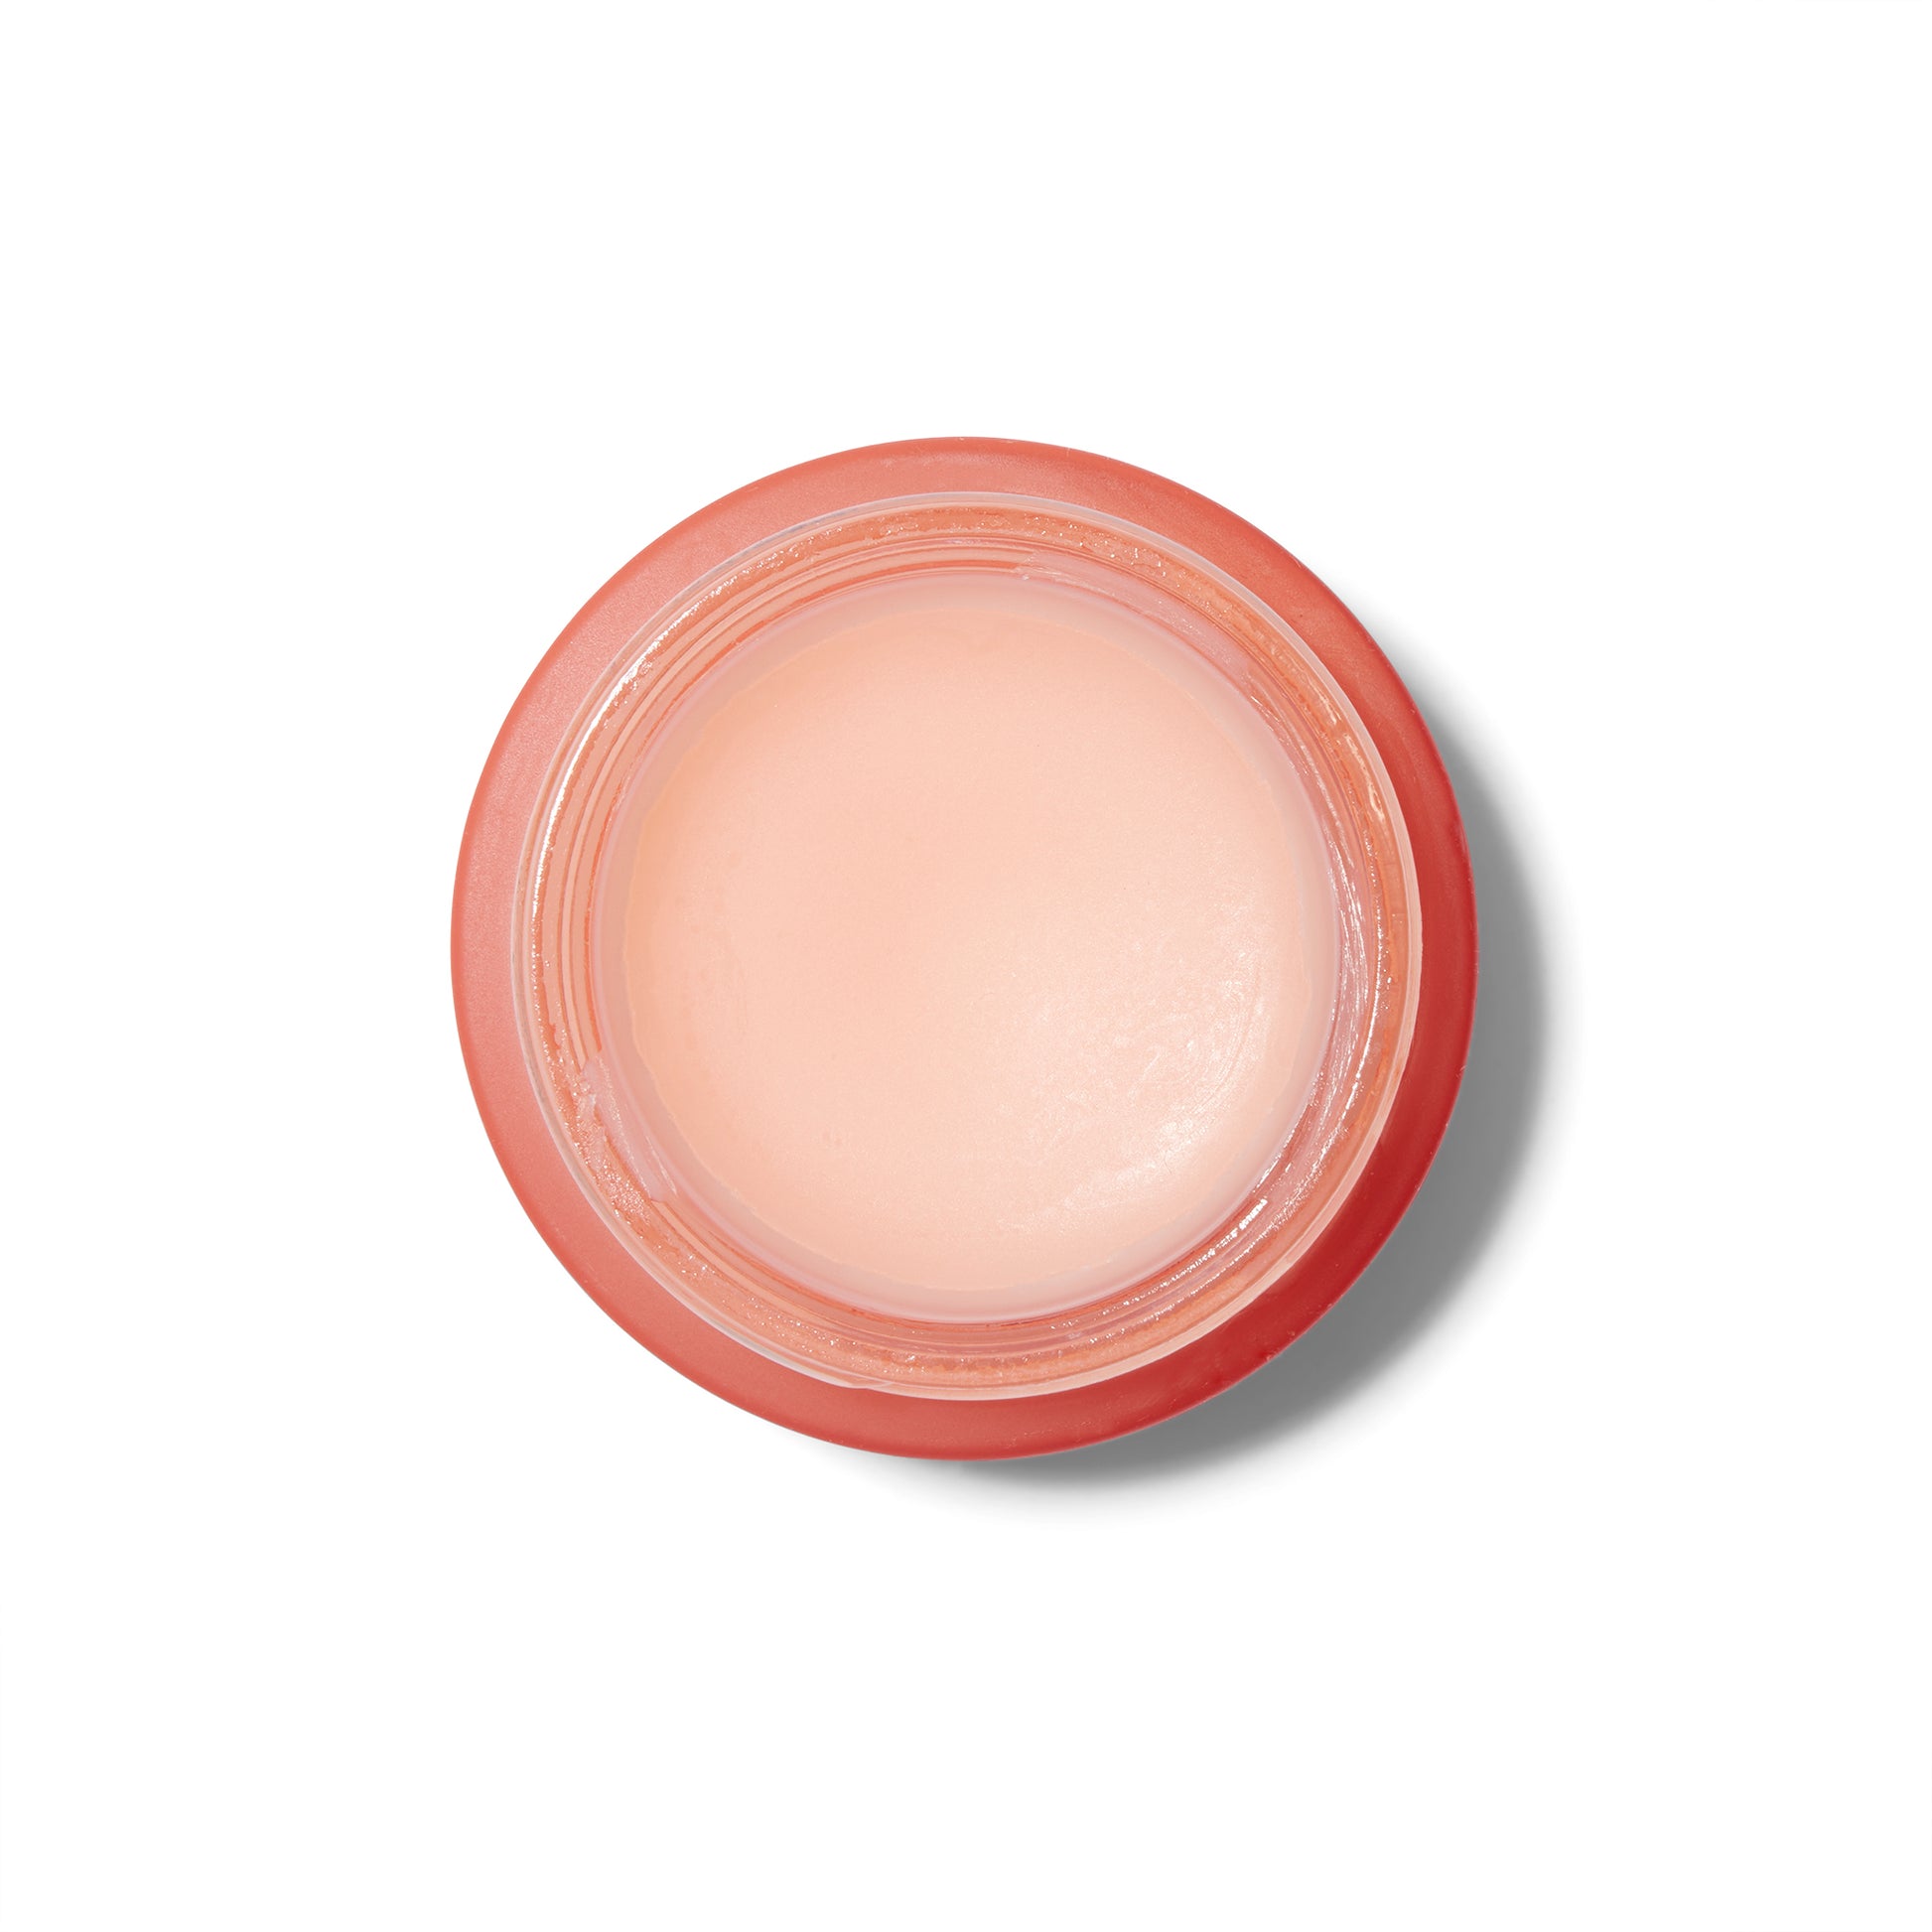 Overhead view of the Rosebud Woman Honor Balm. The jar is a rosy smoked glass and the lid is off showing the pale pink creamy product inside the jar. 